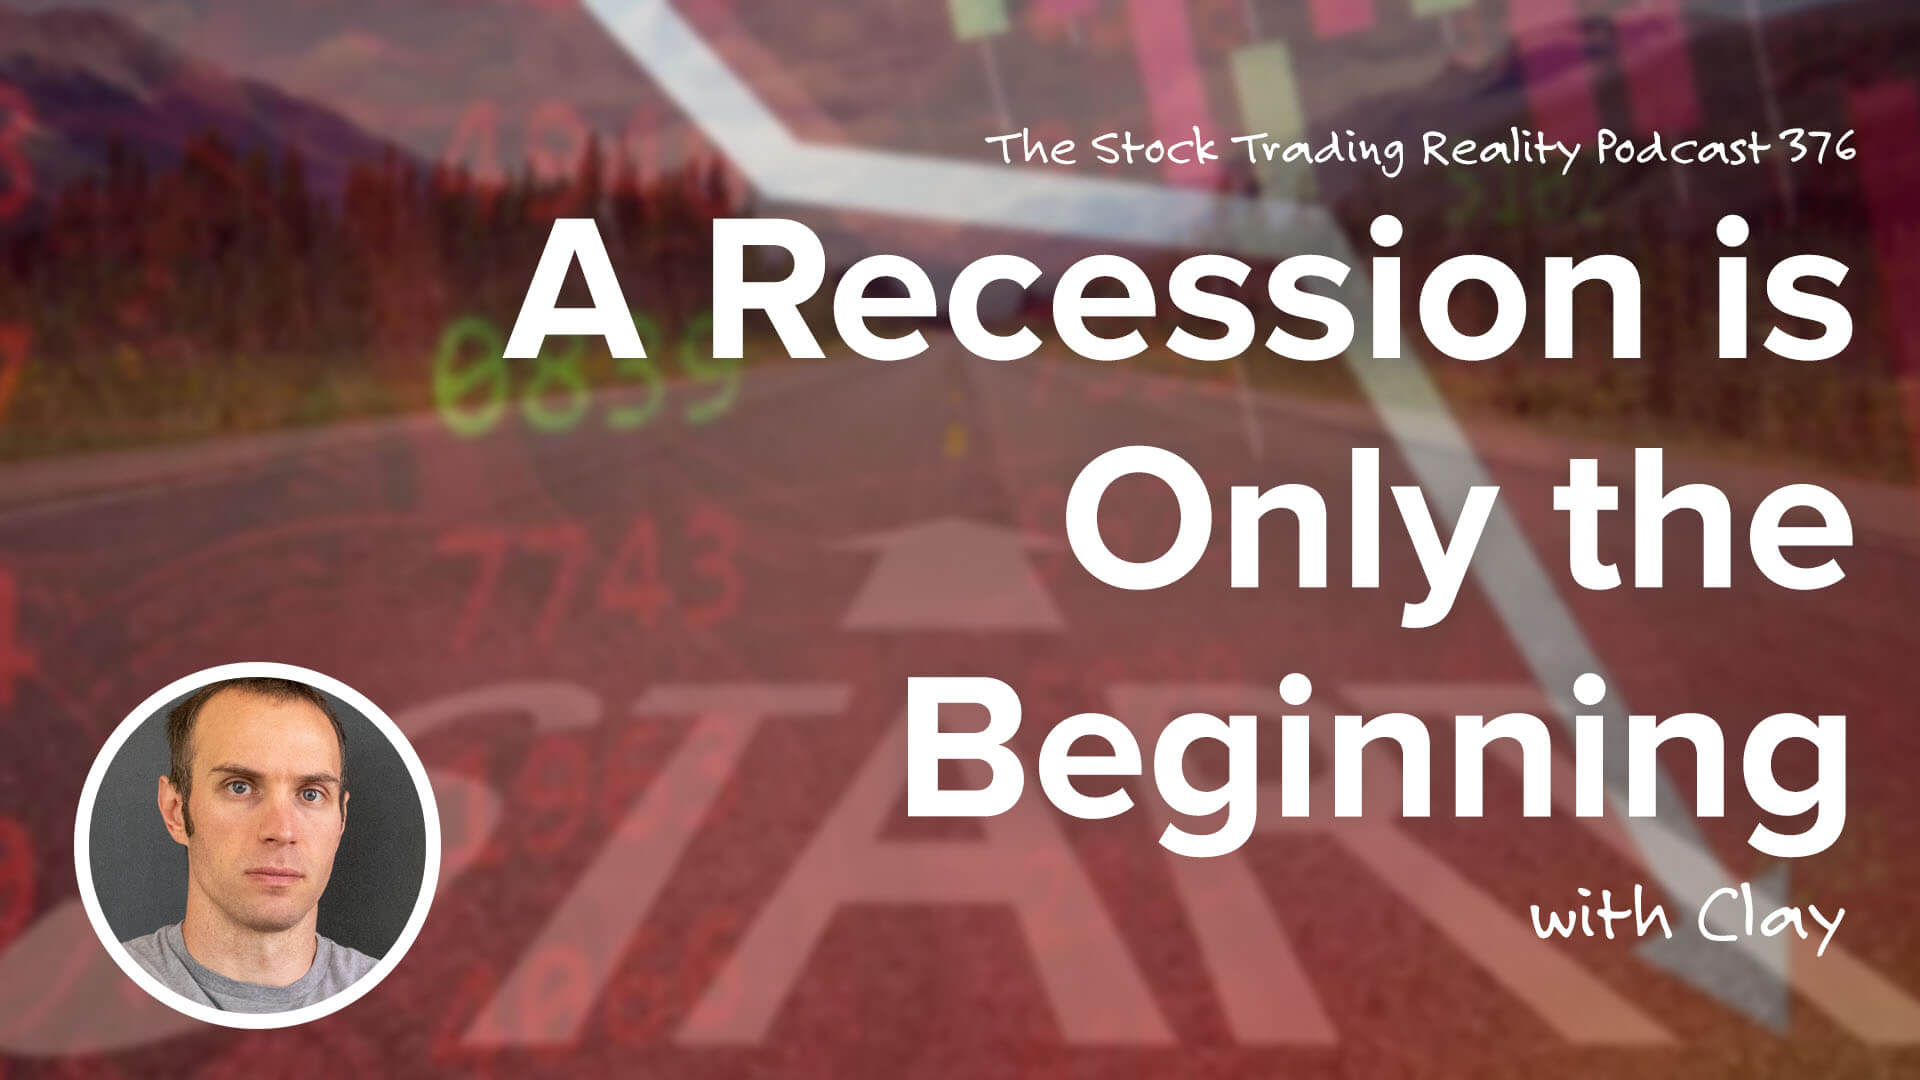 Here’s Why a Recession is Only the Beginning | STR 376